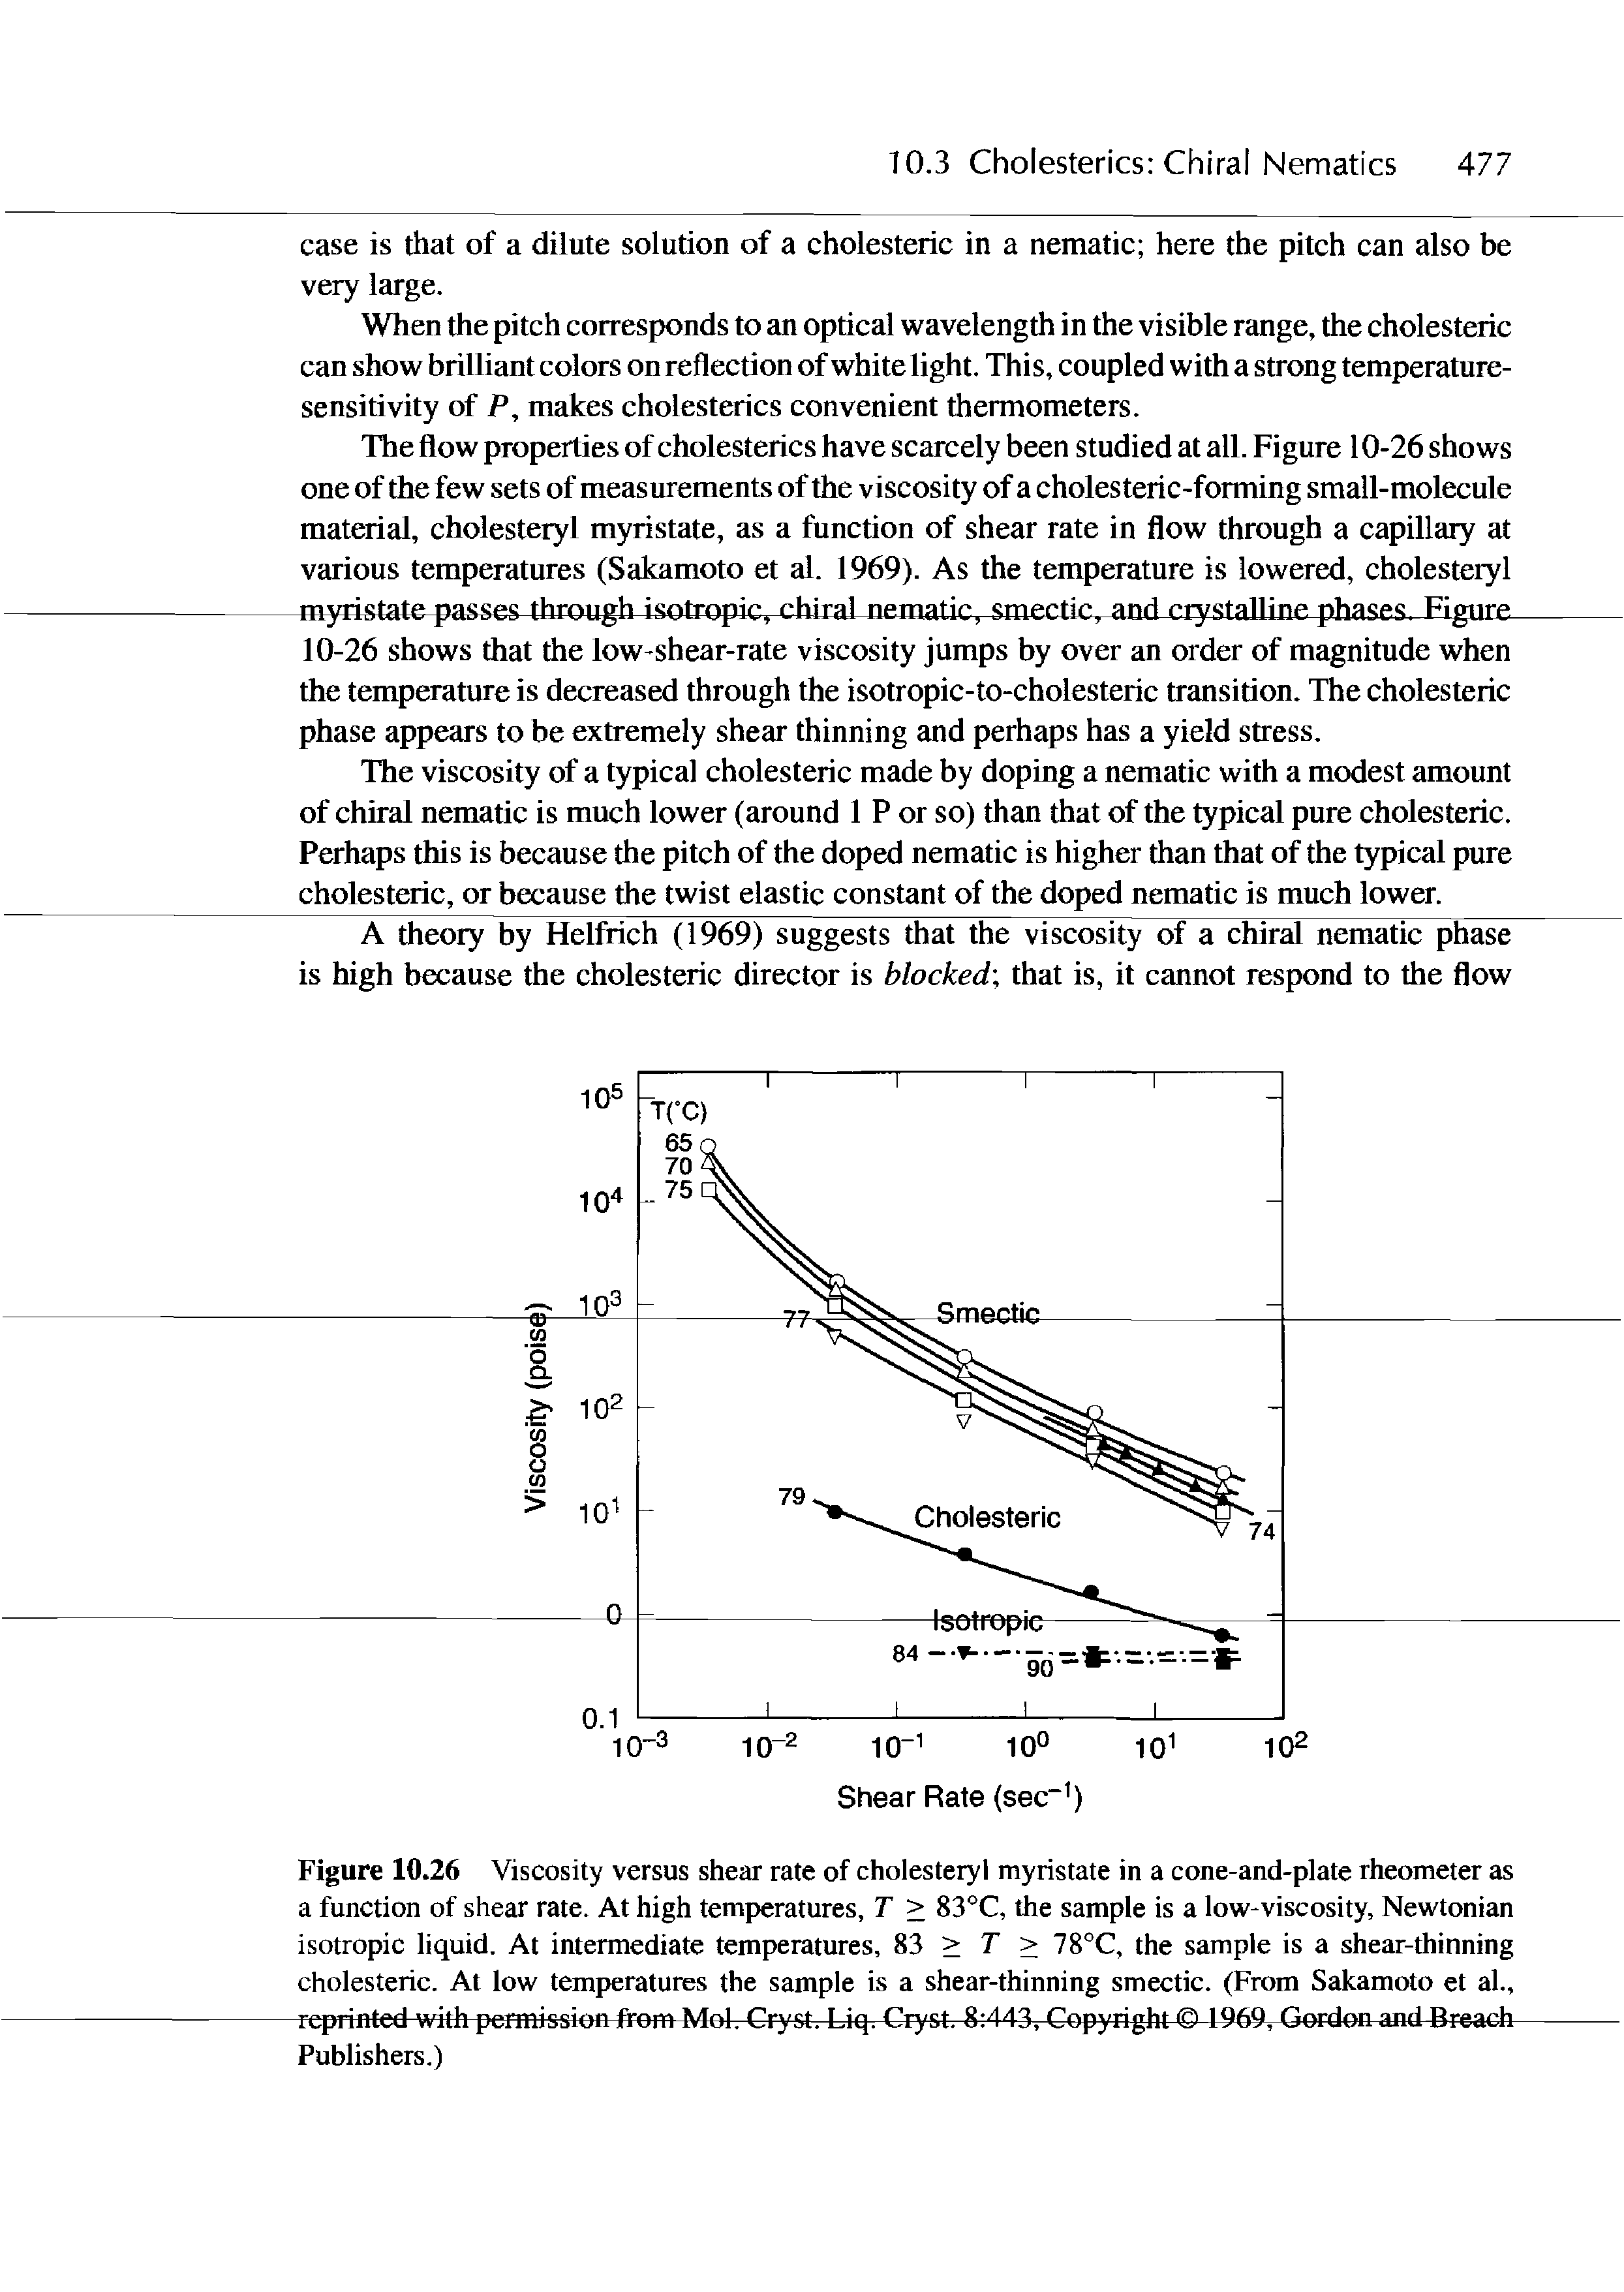 Figure 10.26 Viscosity versus shear rate of cholesteryl myristate in a cone-and-plate rheometer as a function of shear rate. At high temperatures, T > 83 C, the sample is a low-viscosity, Newtonian isotropic liquid. At intermediate temperatures, 83 > T > 78°C, the sample is a shear-thinning cholesteric. At low temperatures the sample is a shear-thinning smectic. (From Sakamoto et al., reprinted with permission from Mol. Cryst. Liq. Cryst. 8 443, Copyright 1969, Gordon and reach Publishers.)...